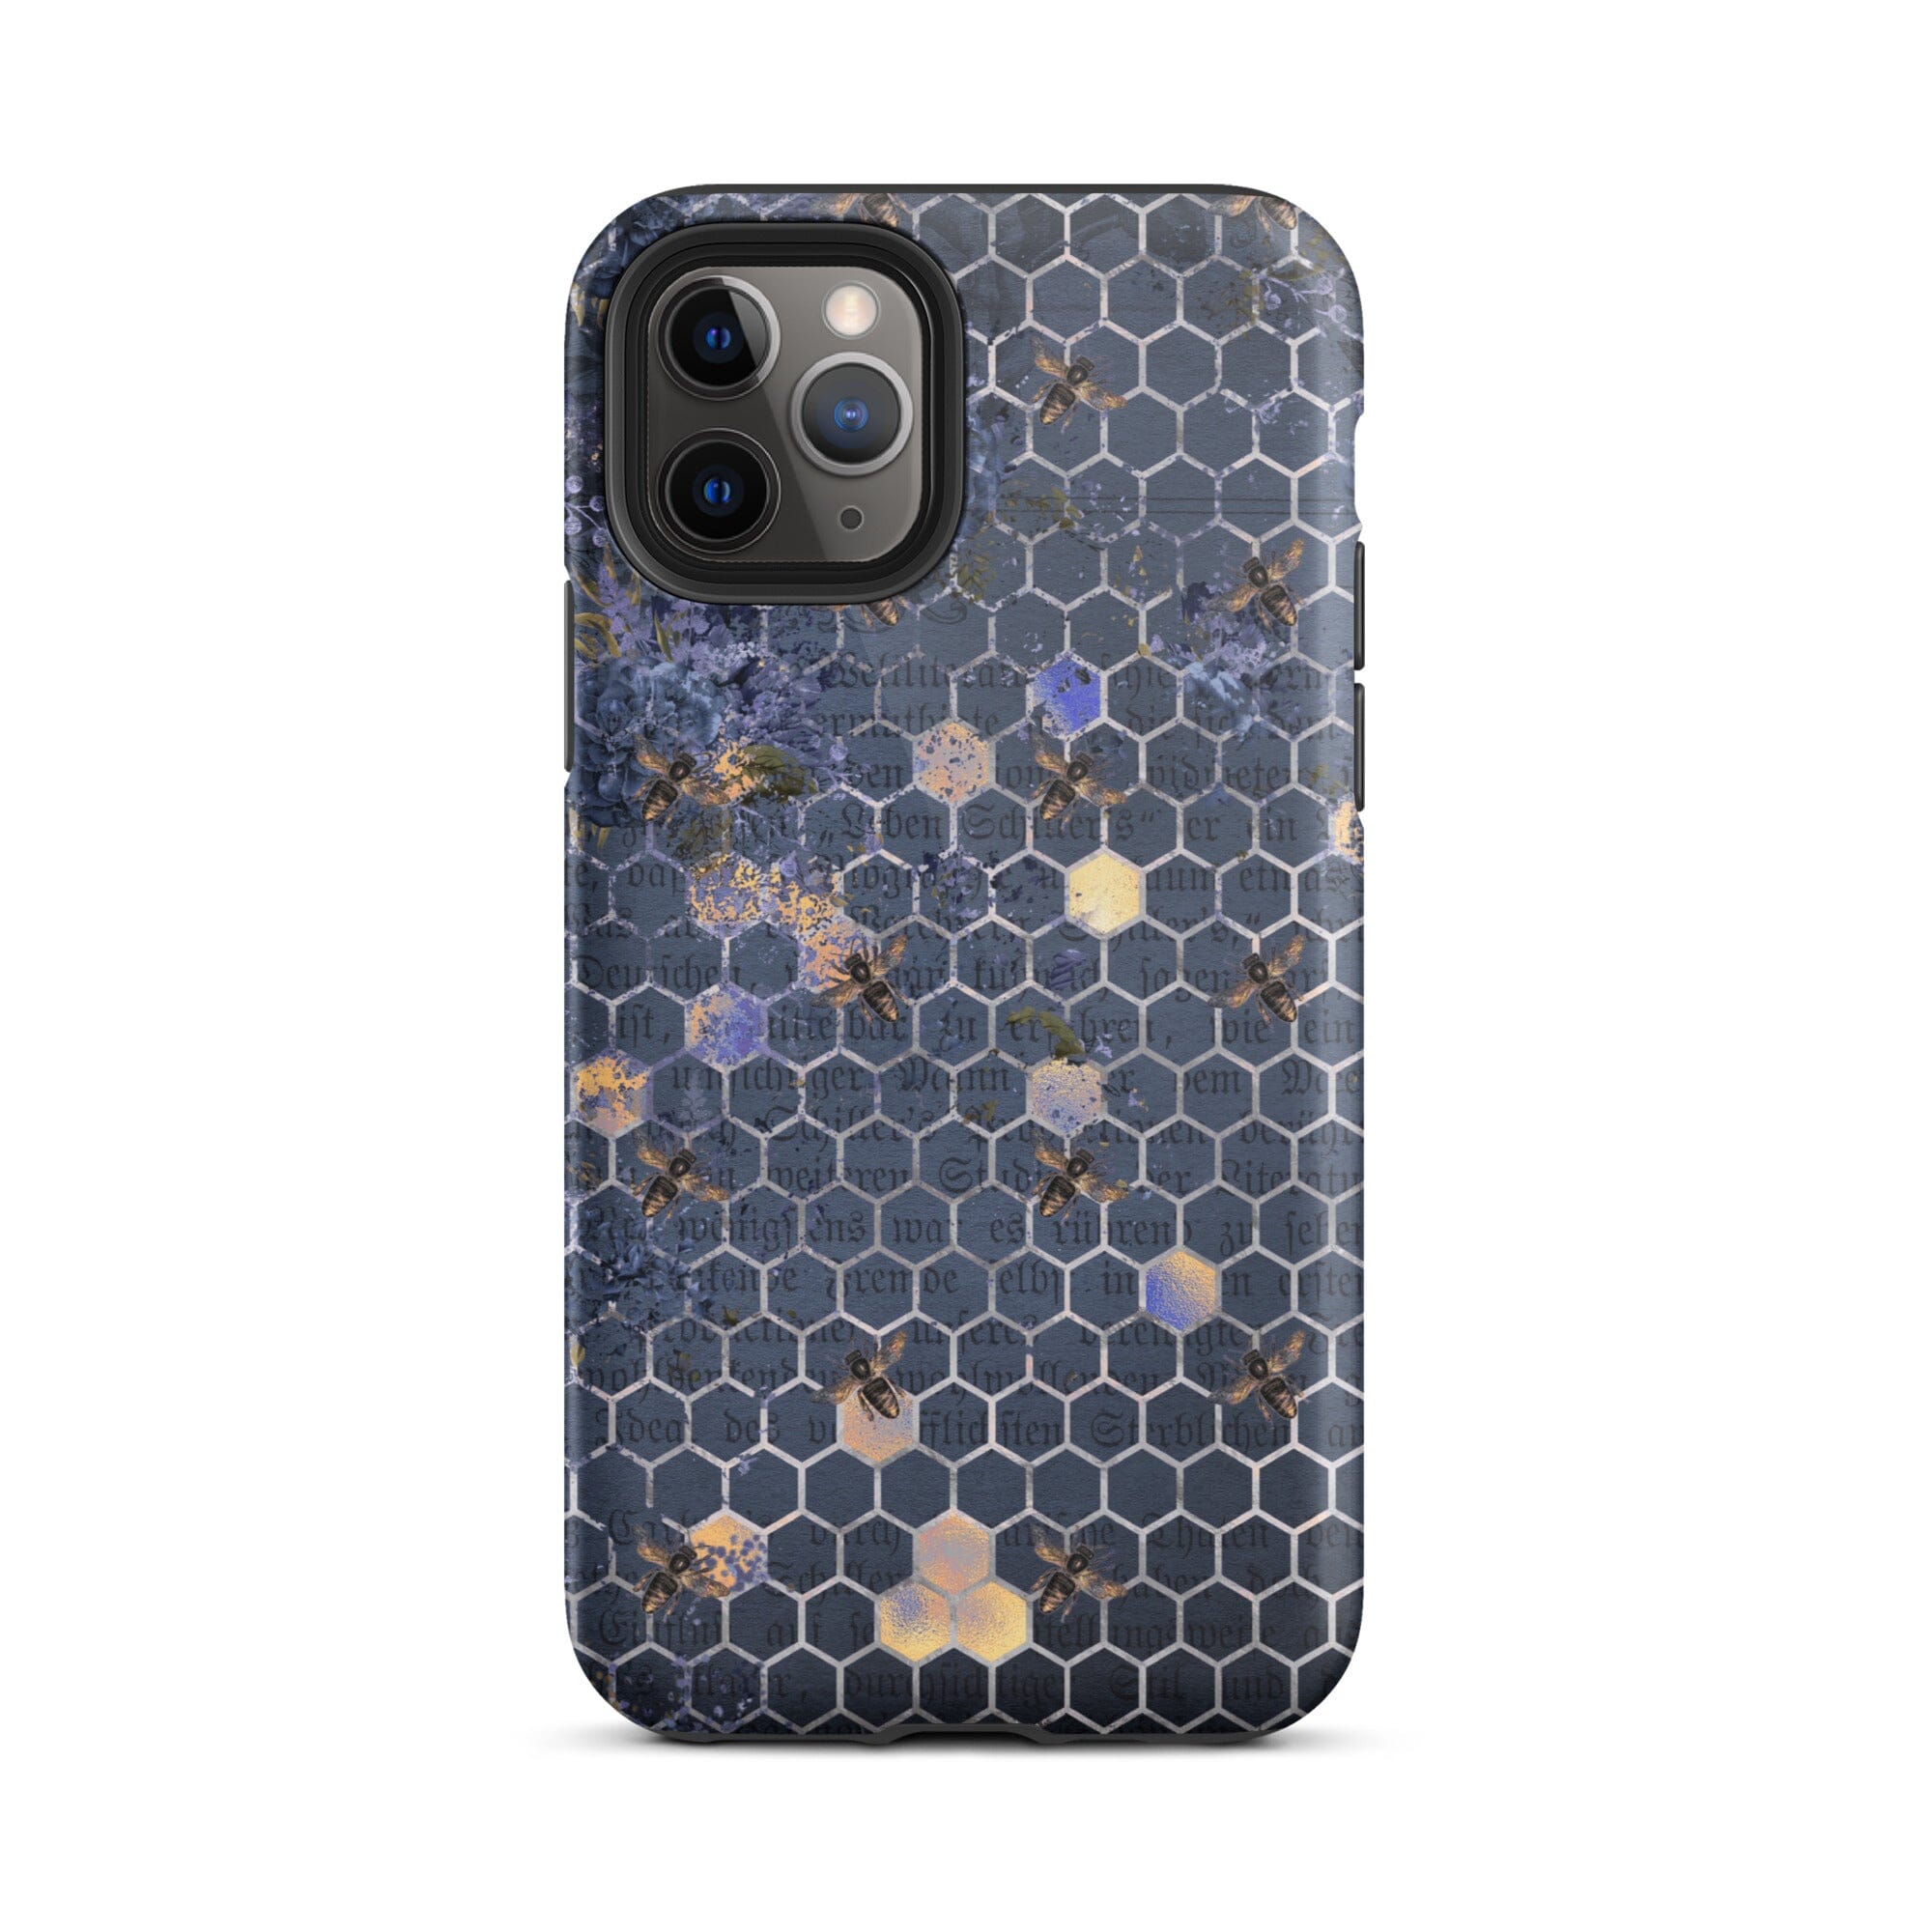 Navy Blue Bee iPhone Case - KBB Exclusive Knitted Belle Boutique iPhone 11 